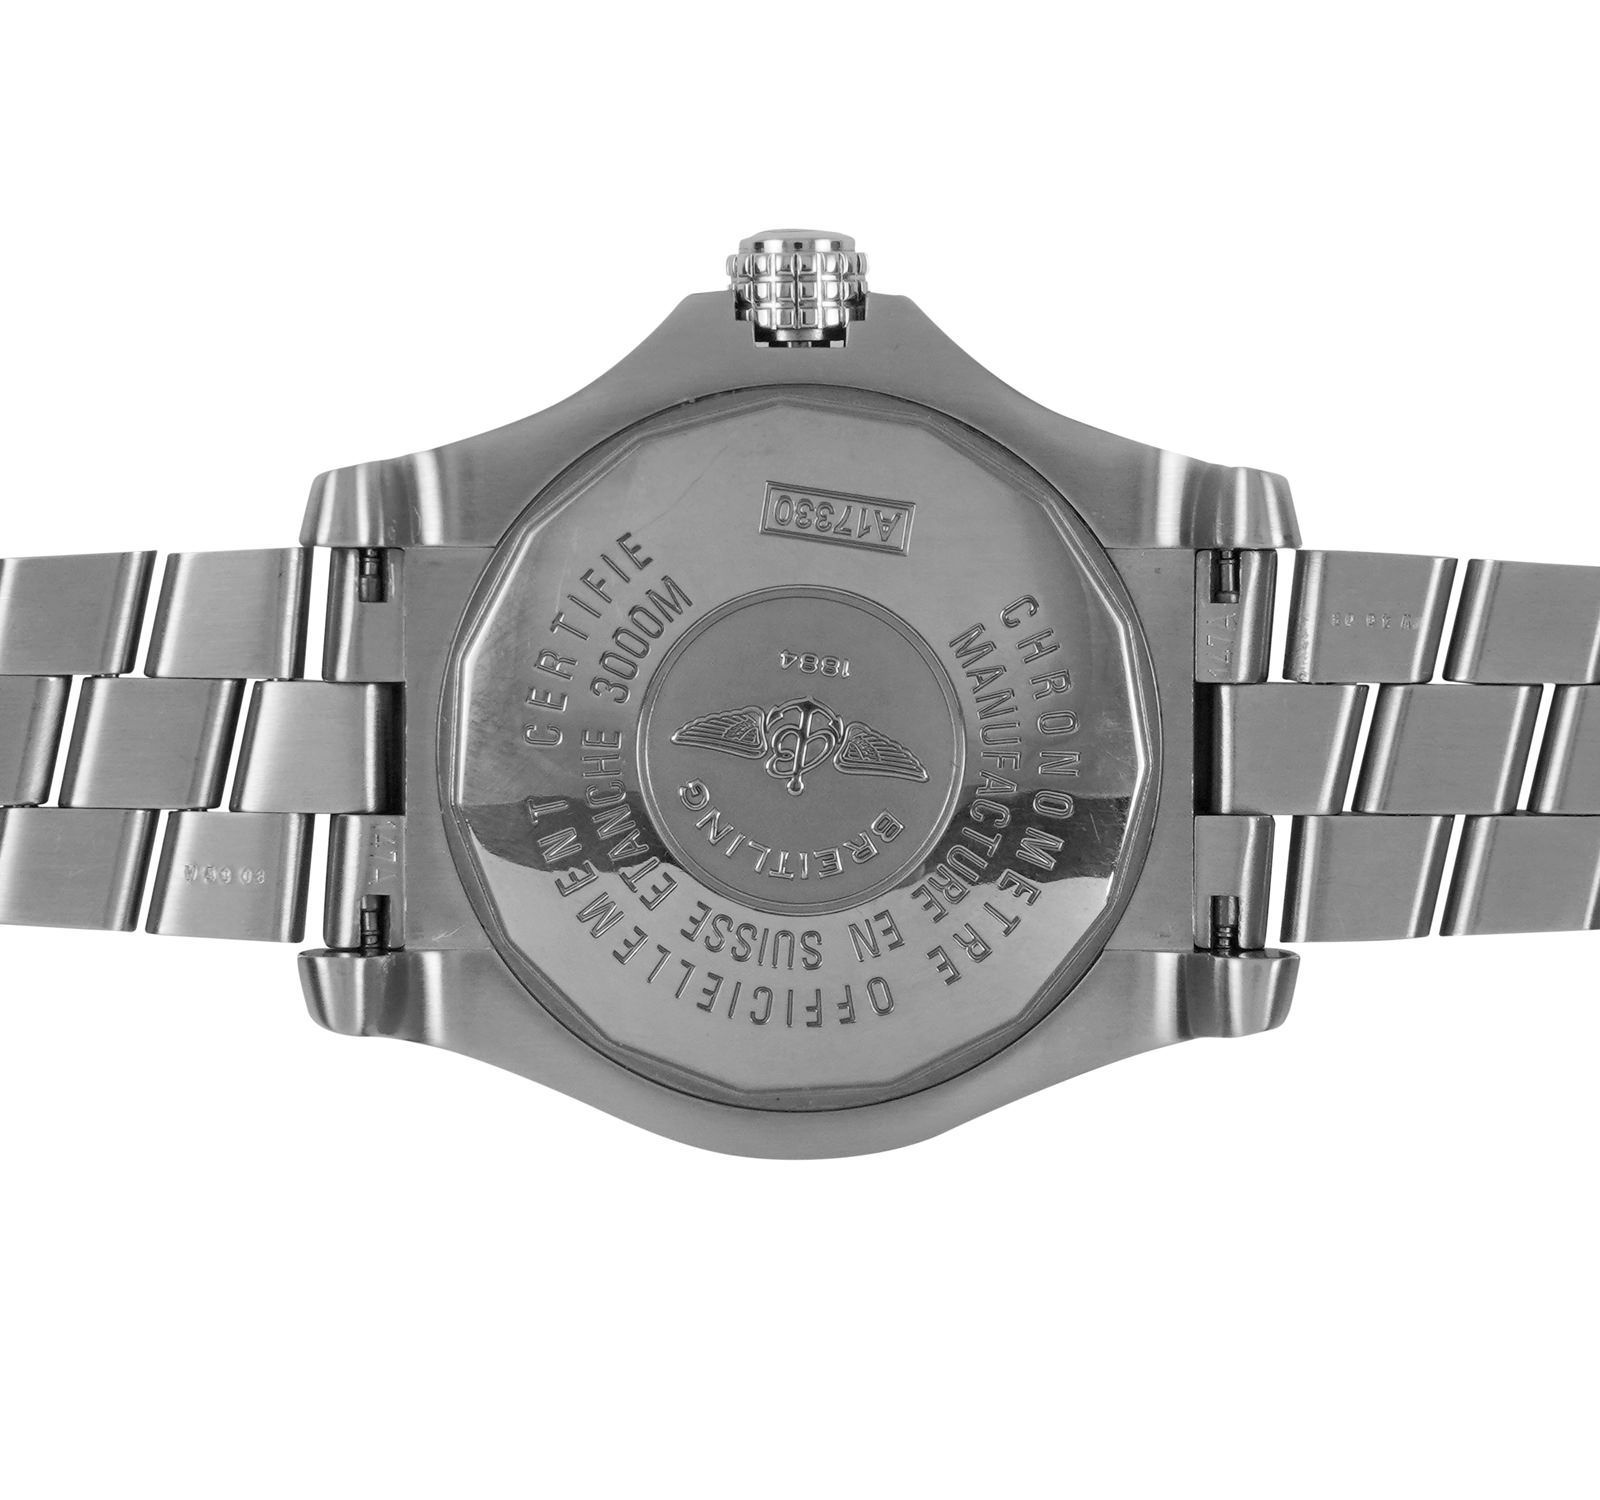 Breitling Avenger Features